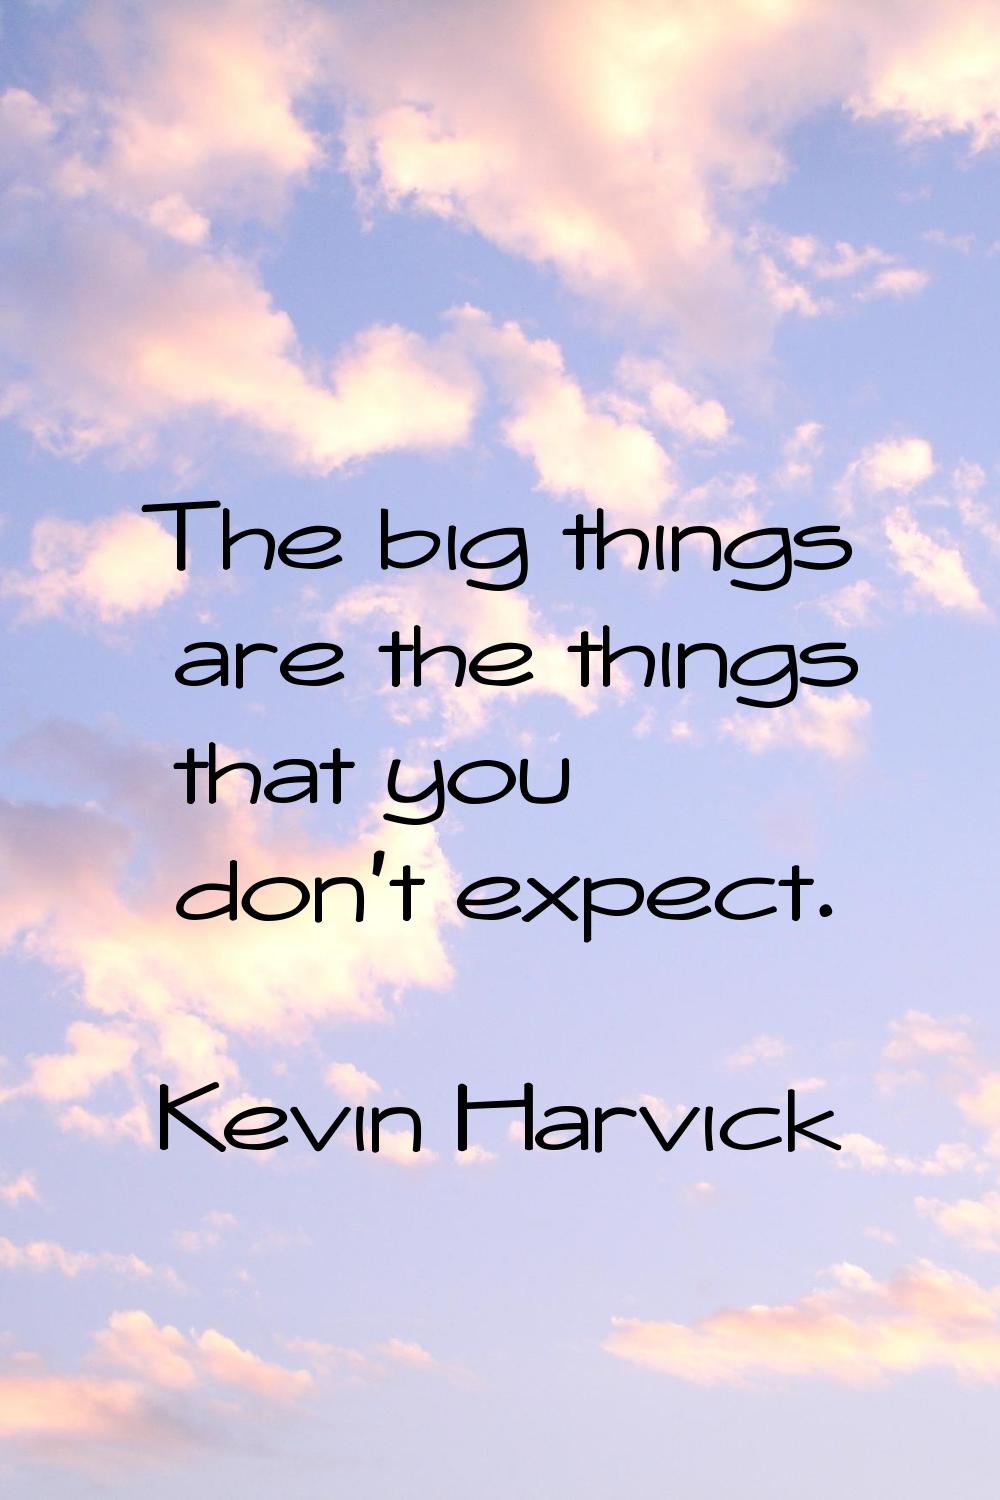 The big things are the things that you don't expect.